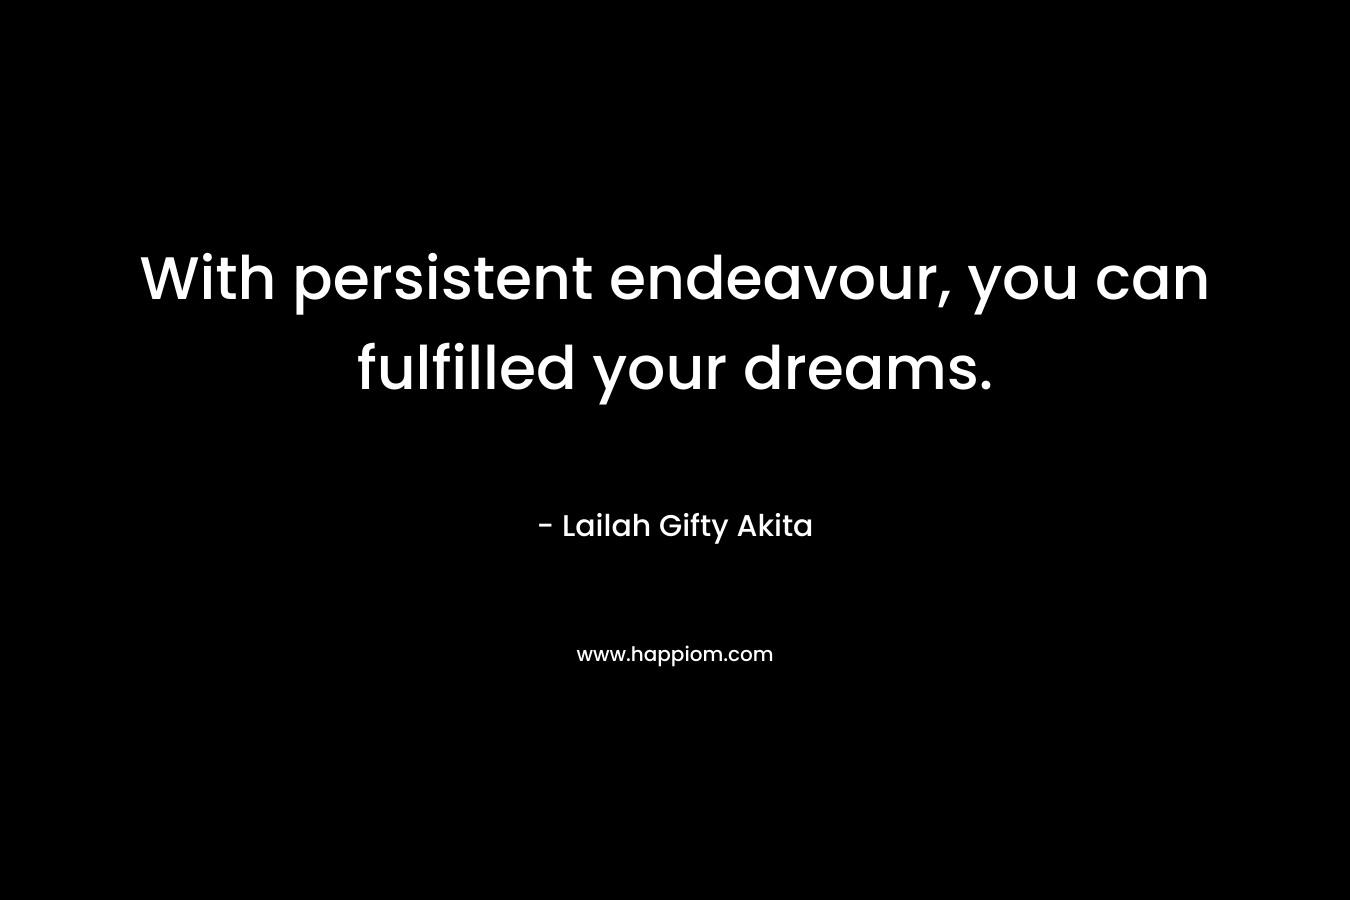 With persistent endeavour, you can fulfilled your dreams. – Lailah Gifty Akita